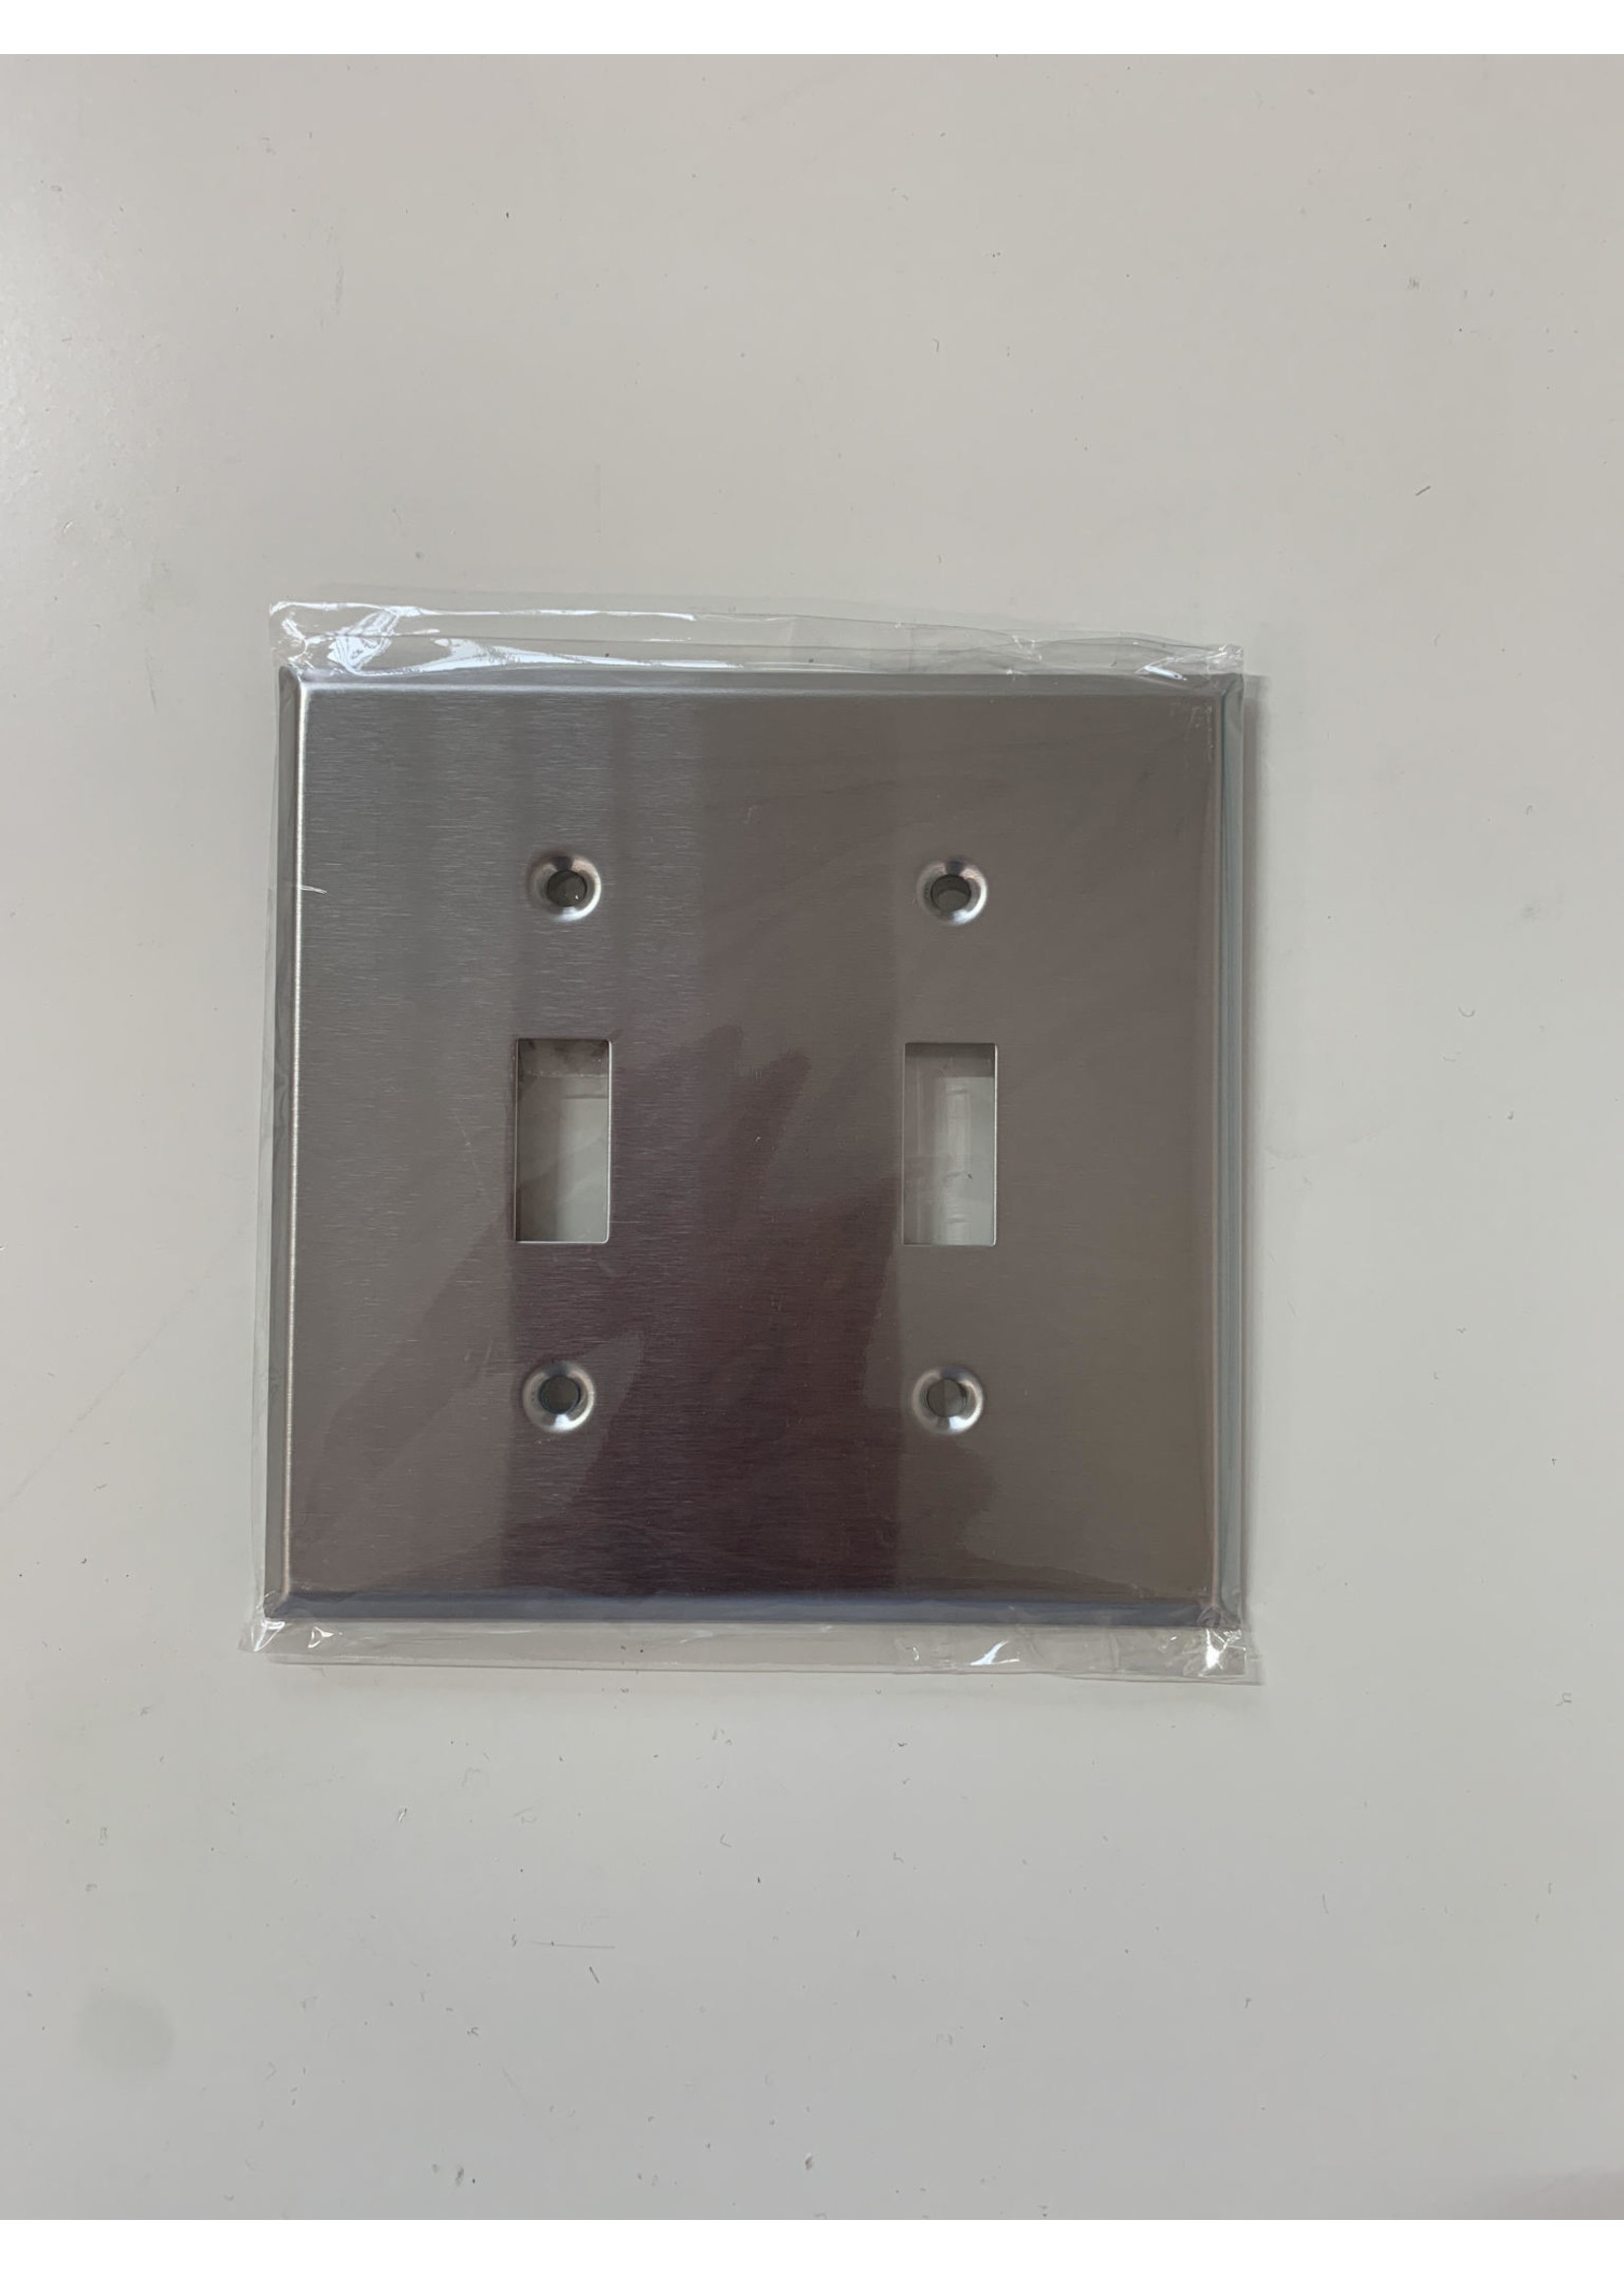 ENERLITES COMMERCIAL 2-GANG TOGGLE SWITCH METAL PLATE STAINLESS STEEL